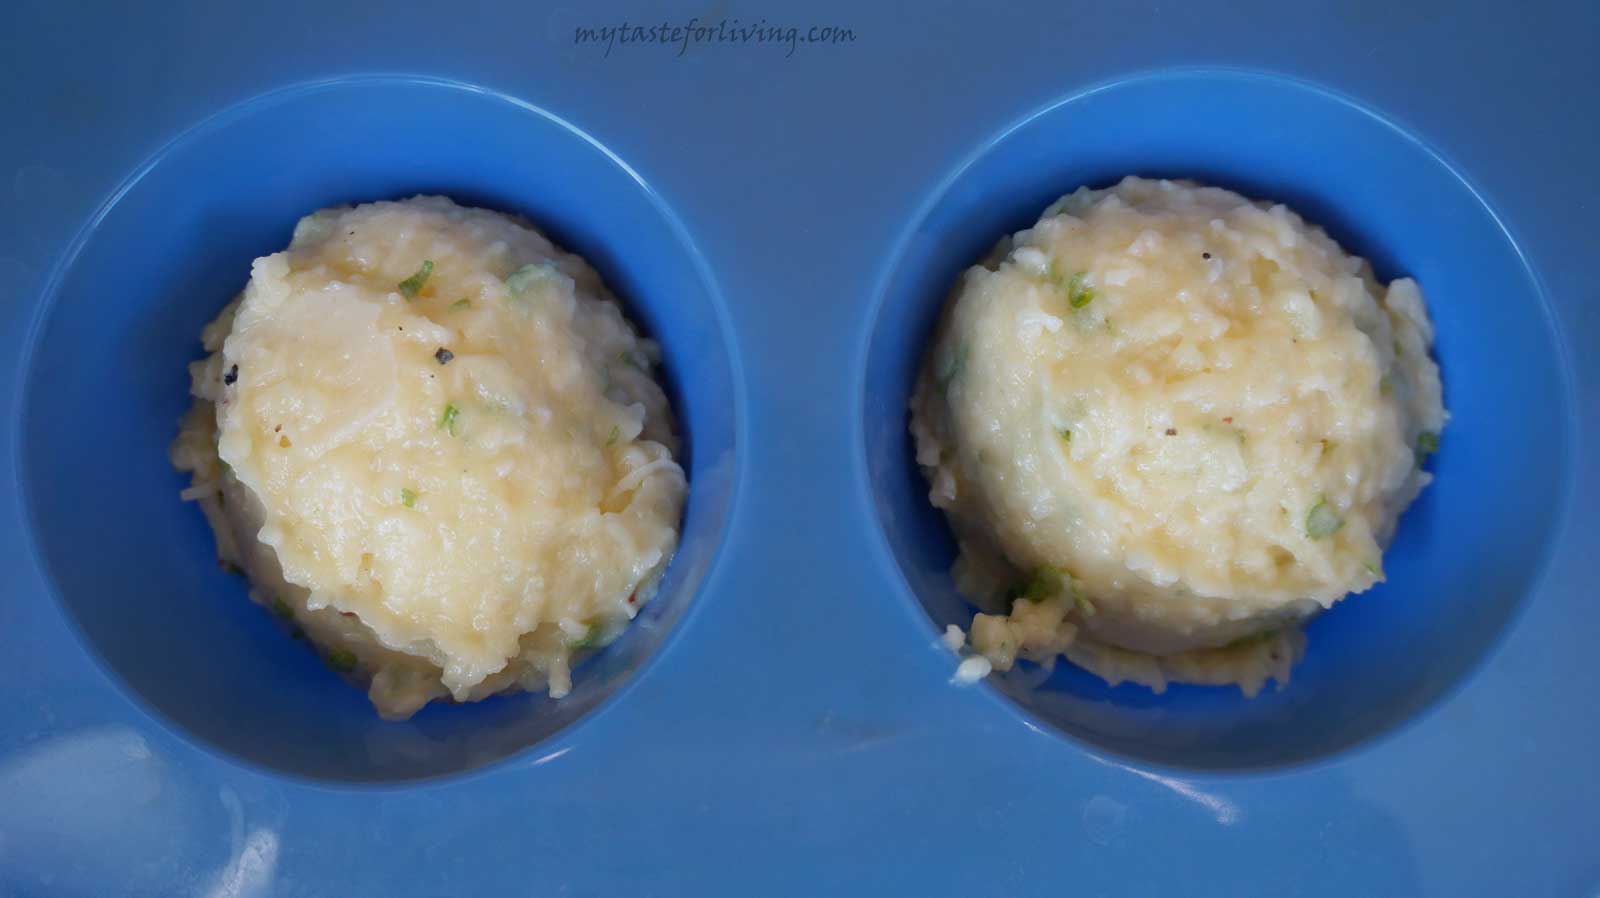 Recipe for muffins from mashed potatoes, eggs, cheese and parmesan, without flour, suitable for starters at your table.